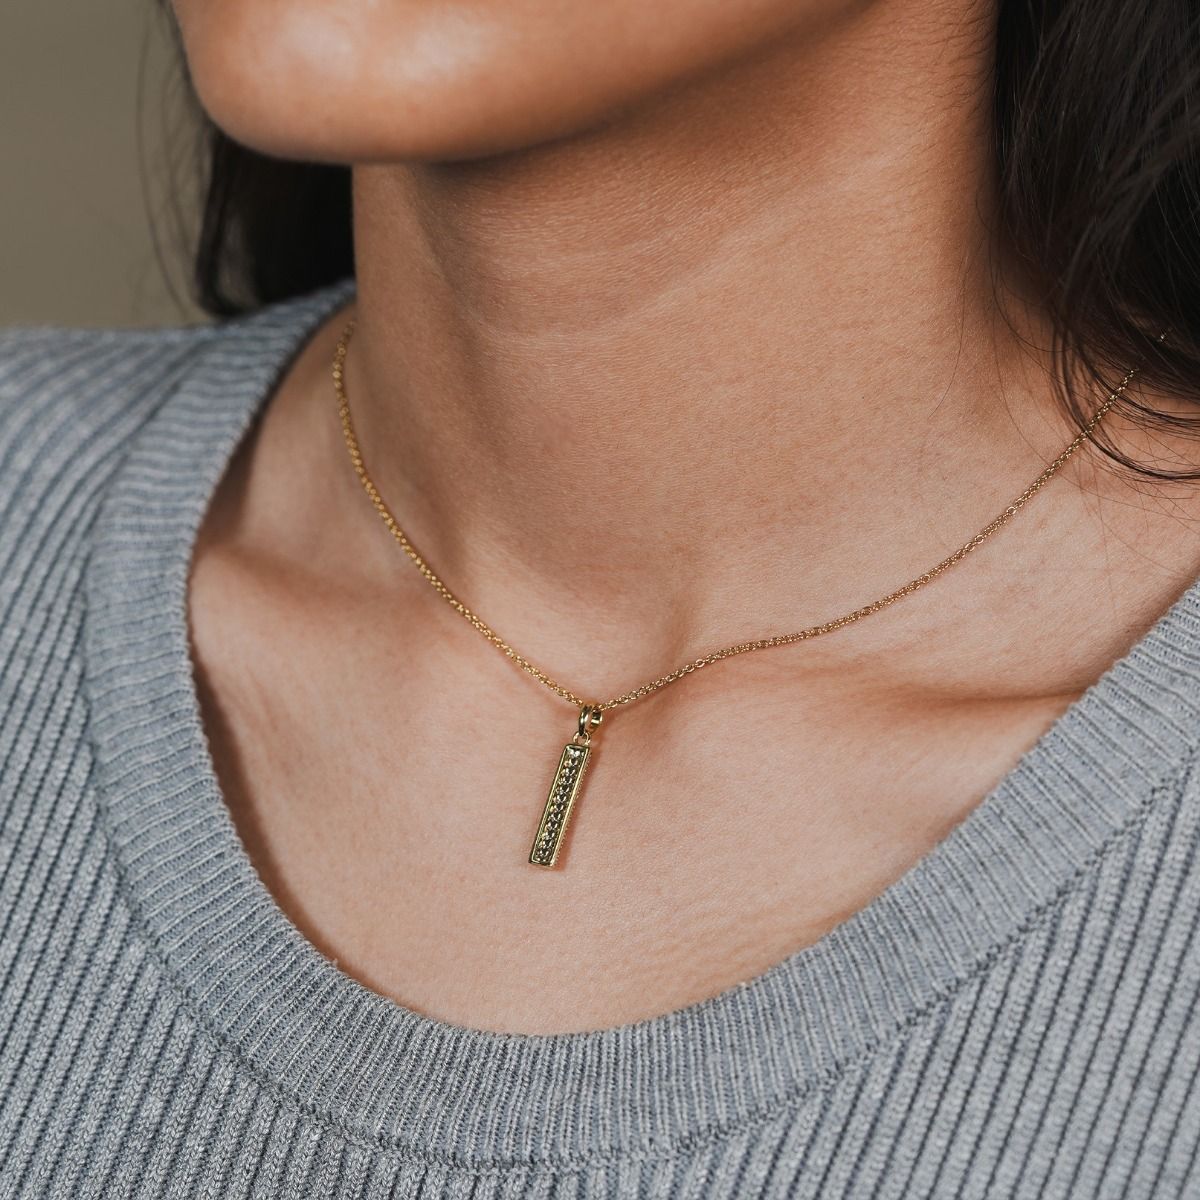 Elevate your elegance with the Pave Bar Necklace. Adorned with cubic zirconia, this necklace adds a touch of luxury to any ensemble. Its exquisite design and meticulous craftsmanship make it a must-have accessory for those who appreciate refined beauty.